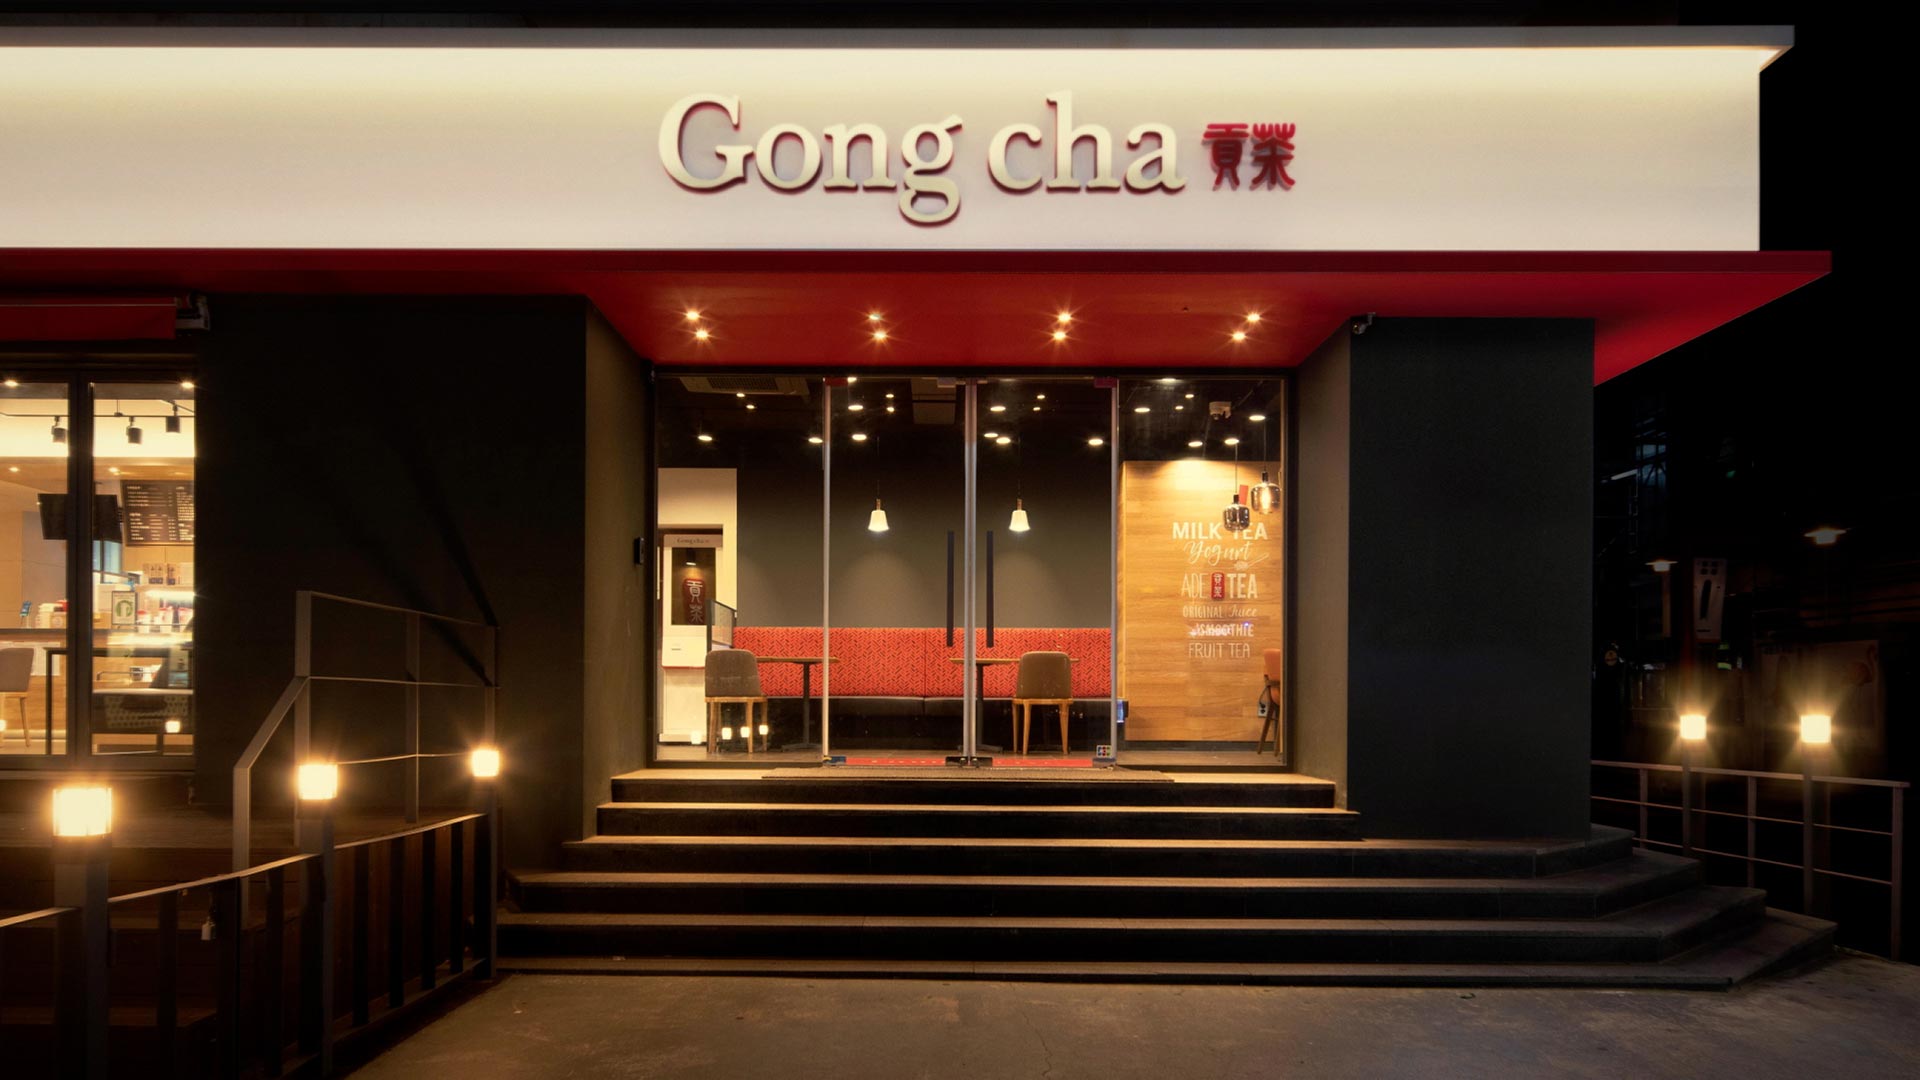 Gong cha cafe exterior